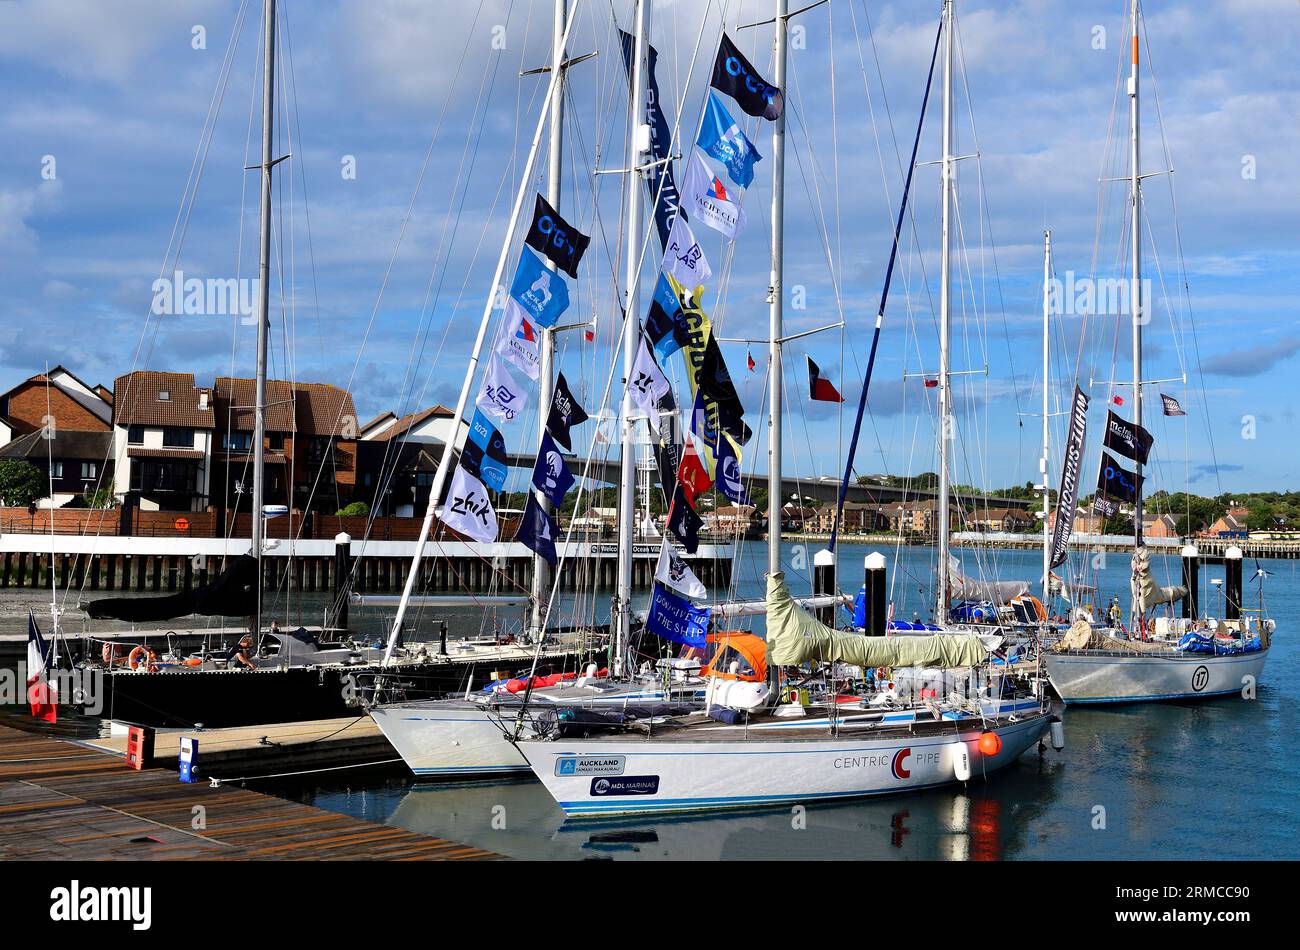 27 August 2023 MDL Ocean Village Marina, Southampton Hampshire UK Five of the 14 contestants entered for the Ocean Globe Race assembling at MDL Ocean Village Marina, Southampton preparing to celebrate the 50th anniversary of the iconic Whitbread Round the World Race. The fully crewed Ocean Globe Race is being run in the spirit of the original 1973 race with no assistance nor use of modern technology. The 27,000 mile three stopovers race via Cape Town, Auckland, and Punta del Este will start at 1300 on 10 Sept 2023 from the Royal Yacht Squadron , Cowes, Isle of Wight. Credit Gary Blake/Alamy Li Stock Photo